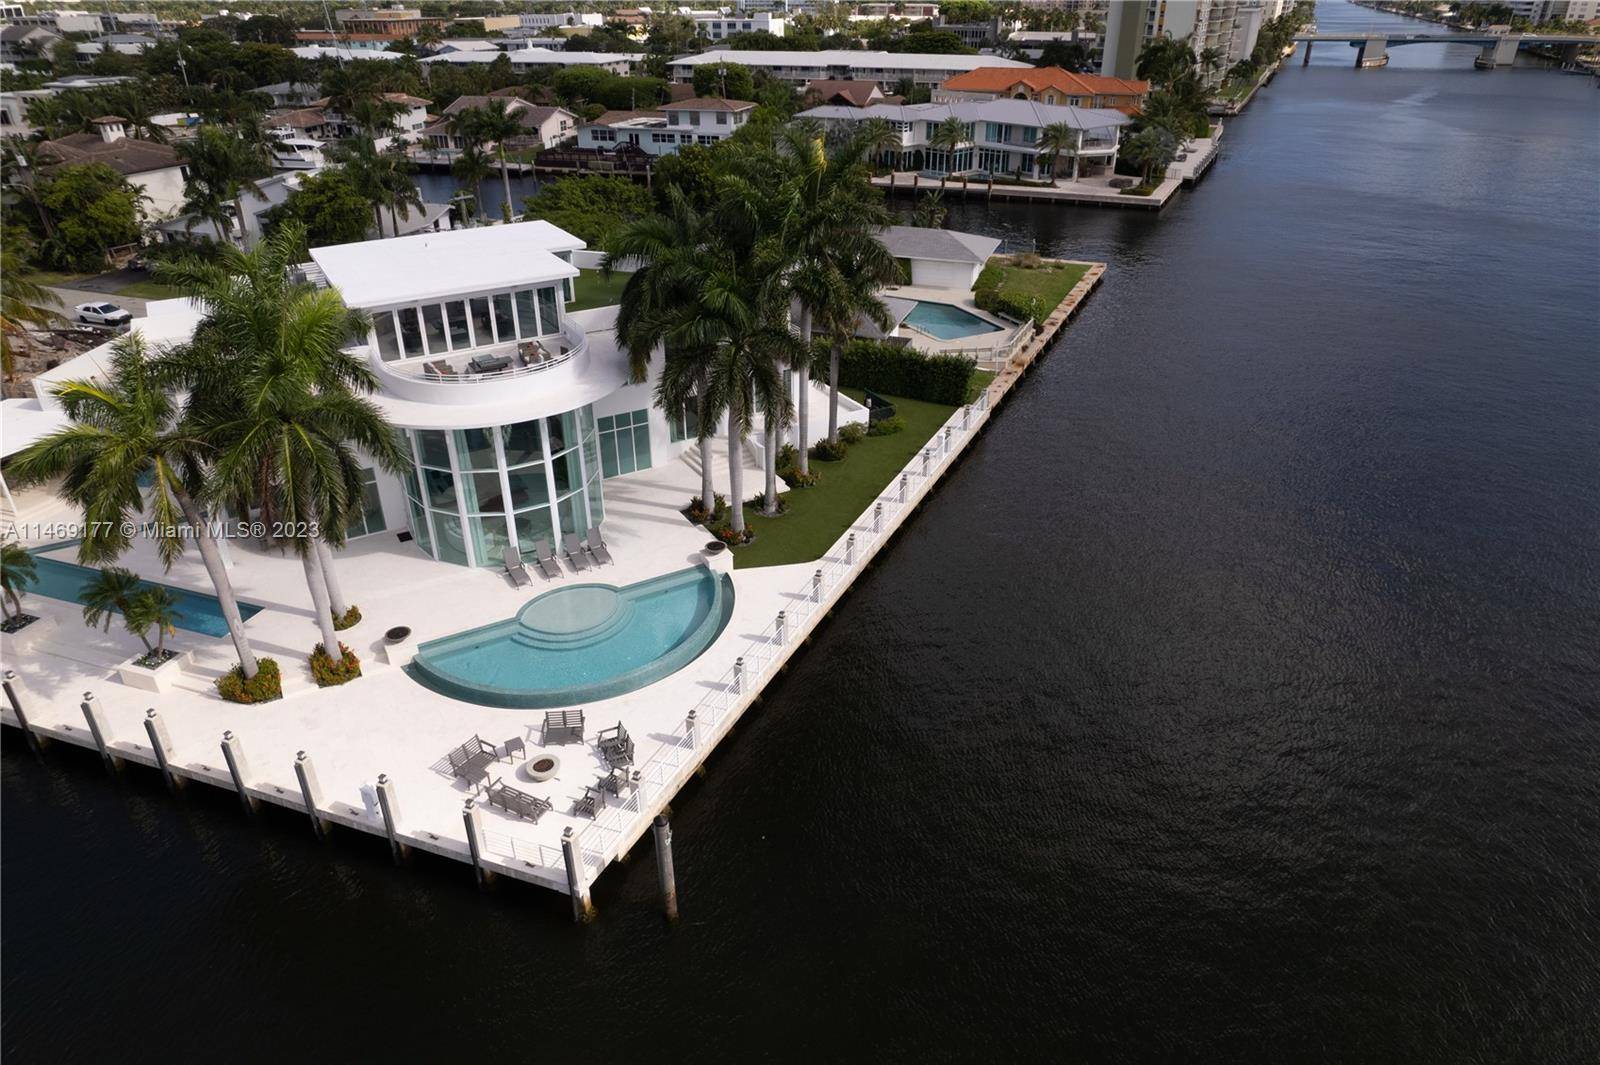 WATCH THE VIRTUAL TOUR. Modern masterpiece with bespoke details offers sprawling luxury living and boating !